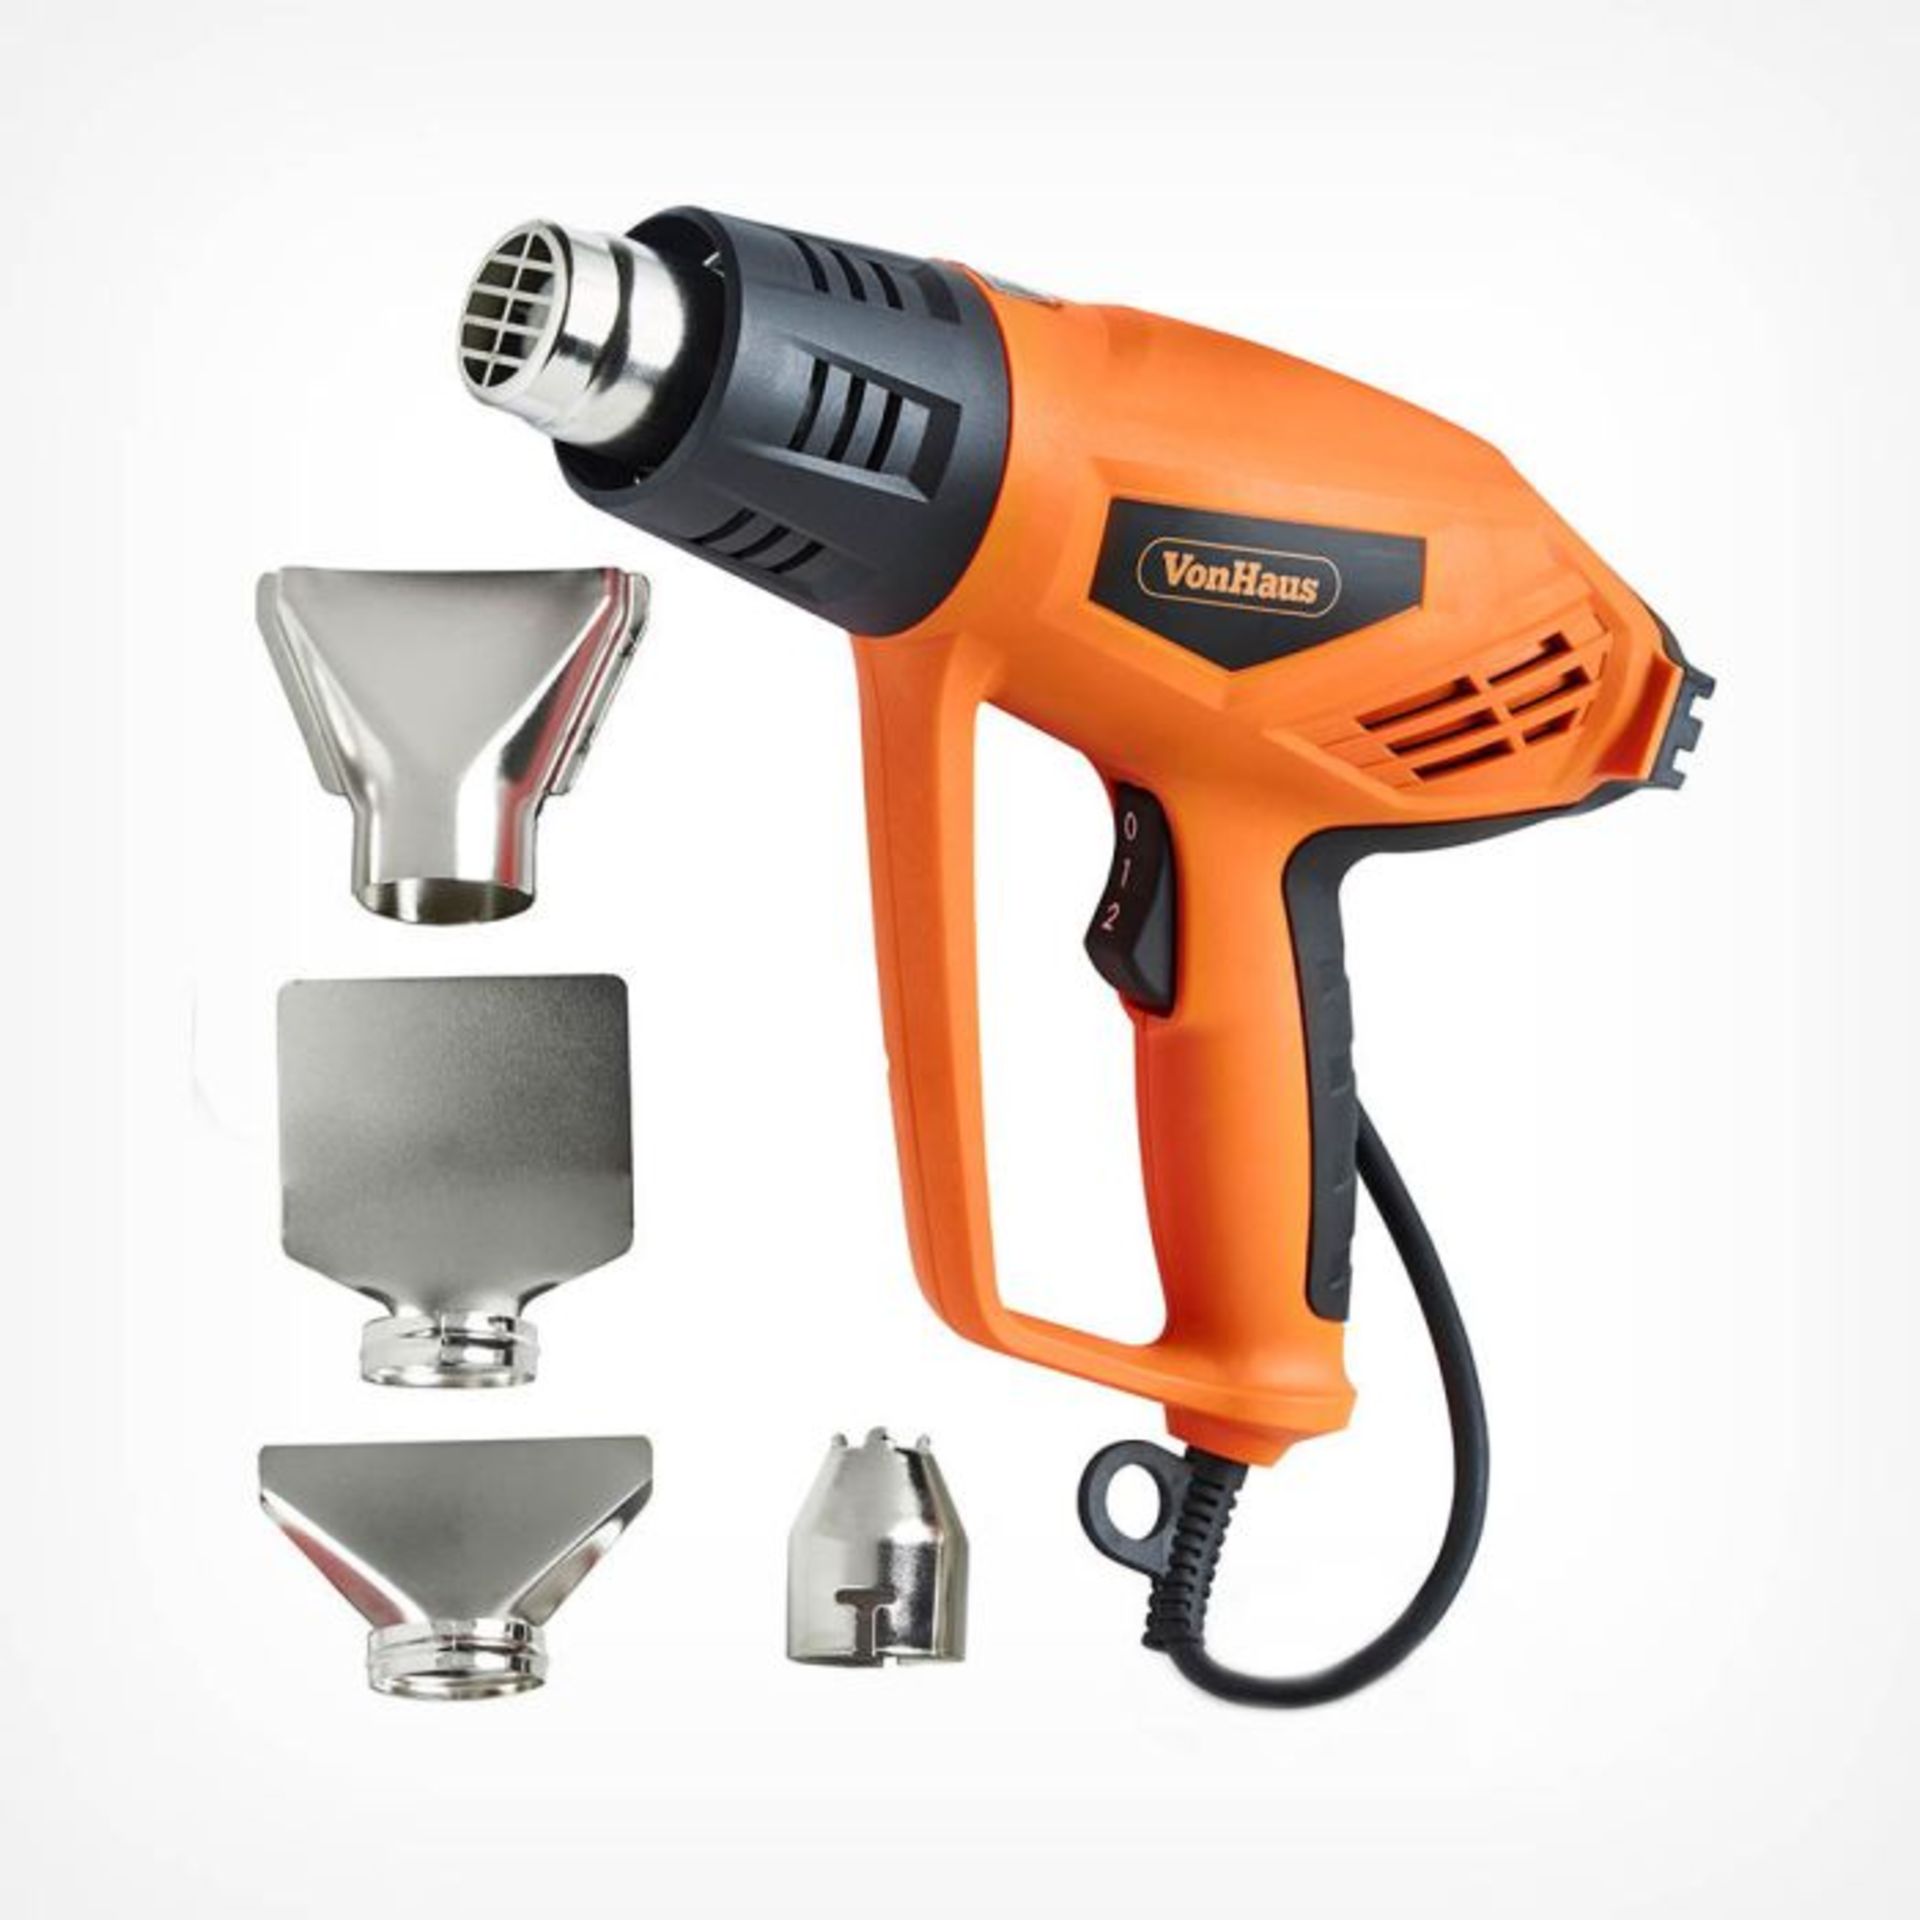 6 x 2000W Heat Gun. - ER35. Ever tried scraping off paint or taking up vinyl flooring with hand